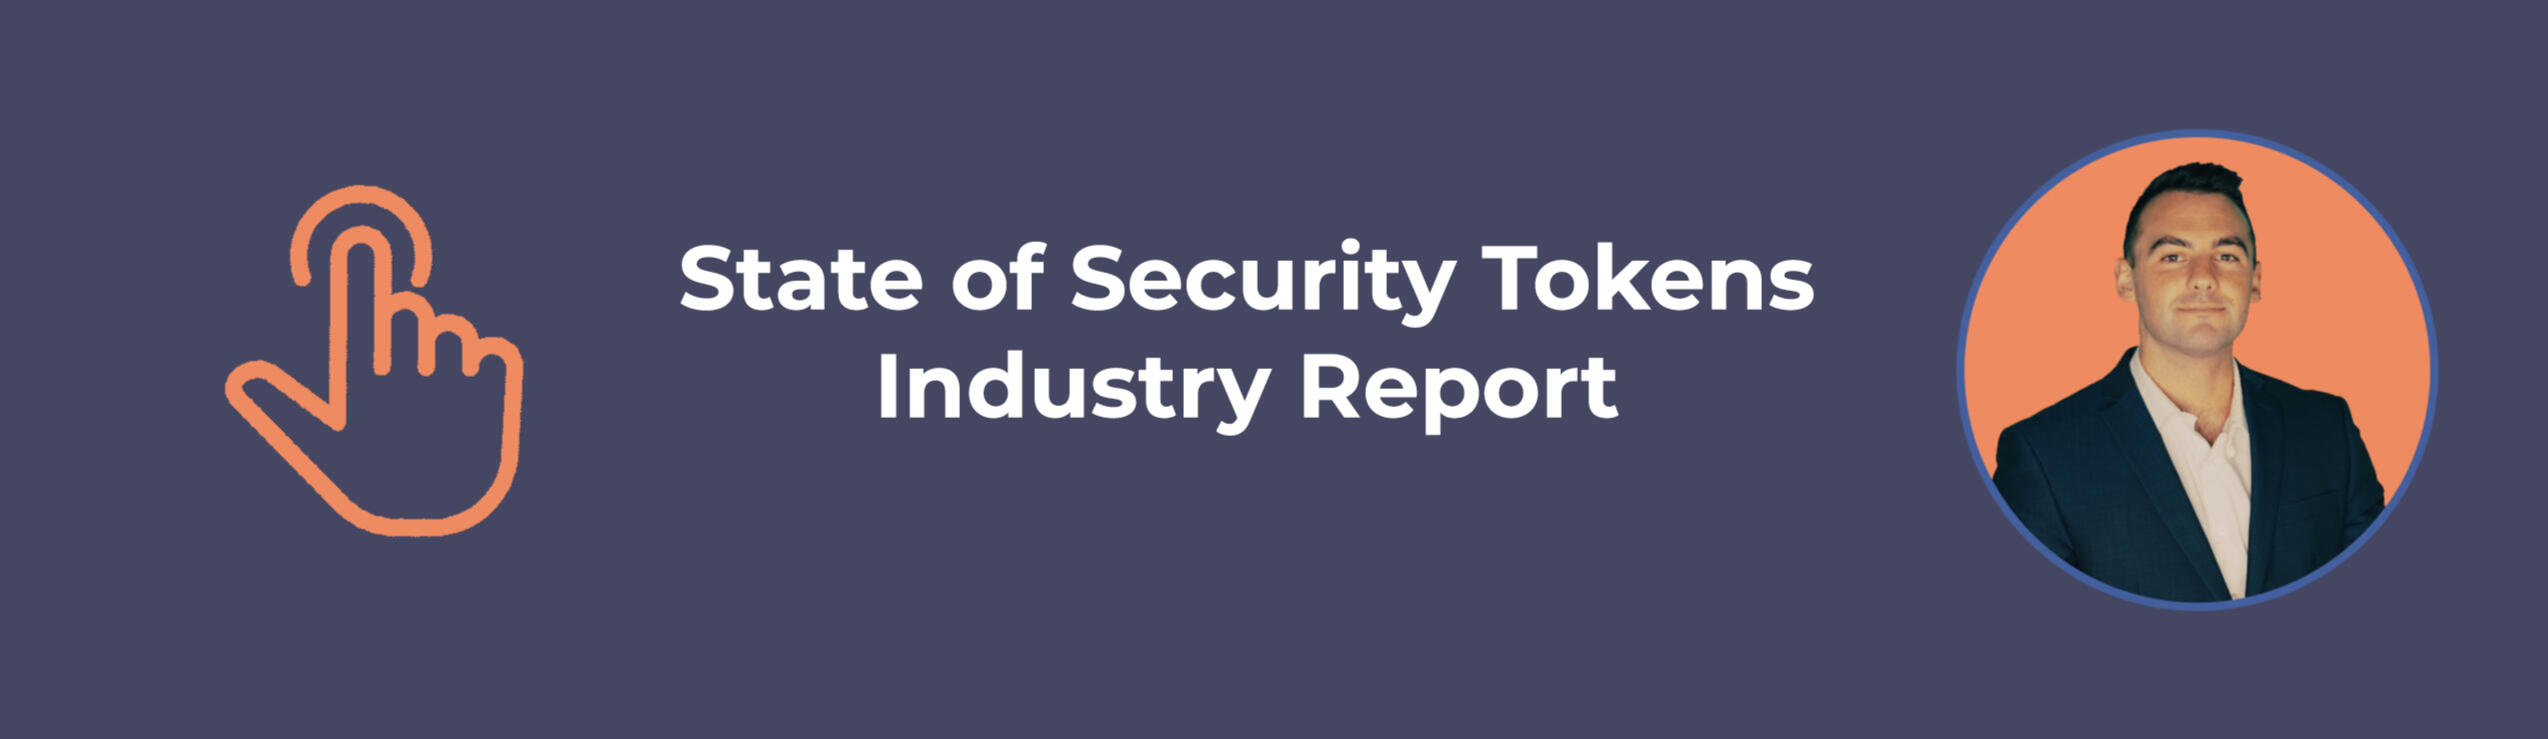 Latest Industry Report